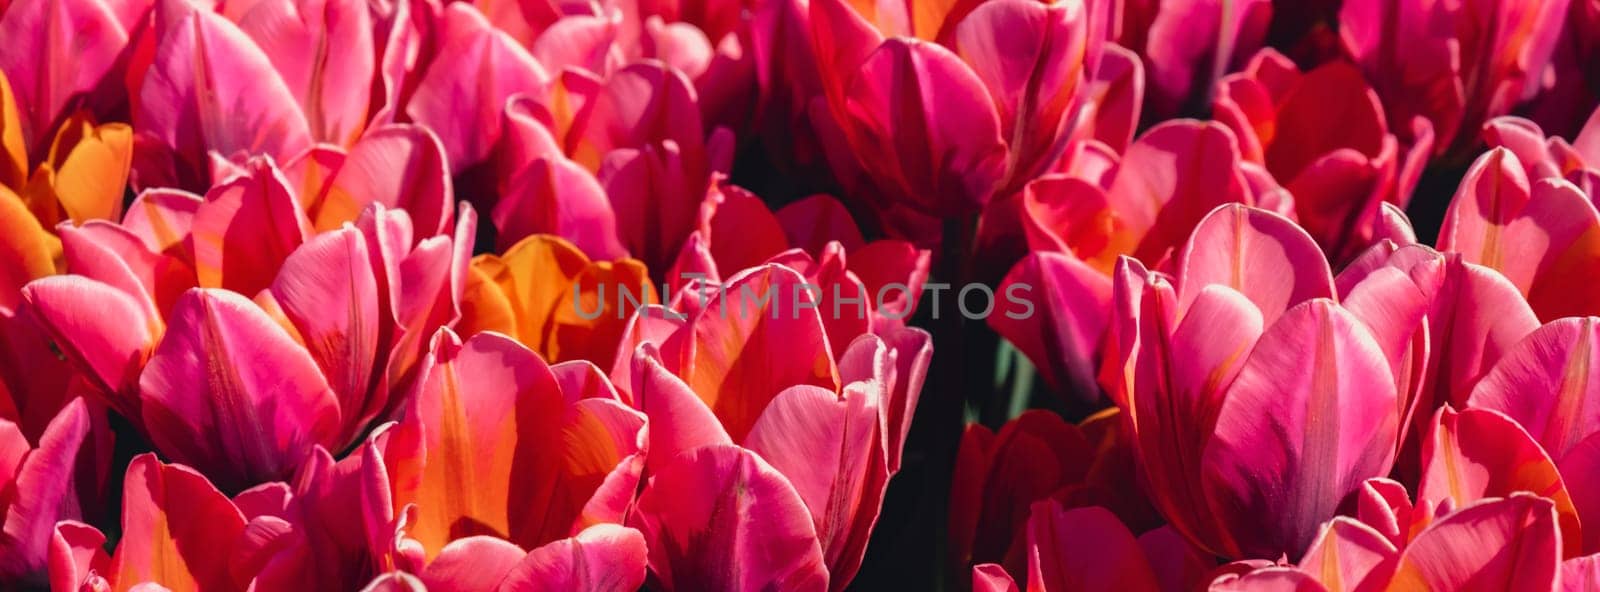 Pink Tulip flowers blooming in the garden field landscape. Beautiful spring garden with many red tulips outdoors. Blooming floral park in sunrise light. Stripped tulips growing in flourish meadow sunny day Keukenhof. Natural floral pattern blowing in wind in spring